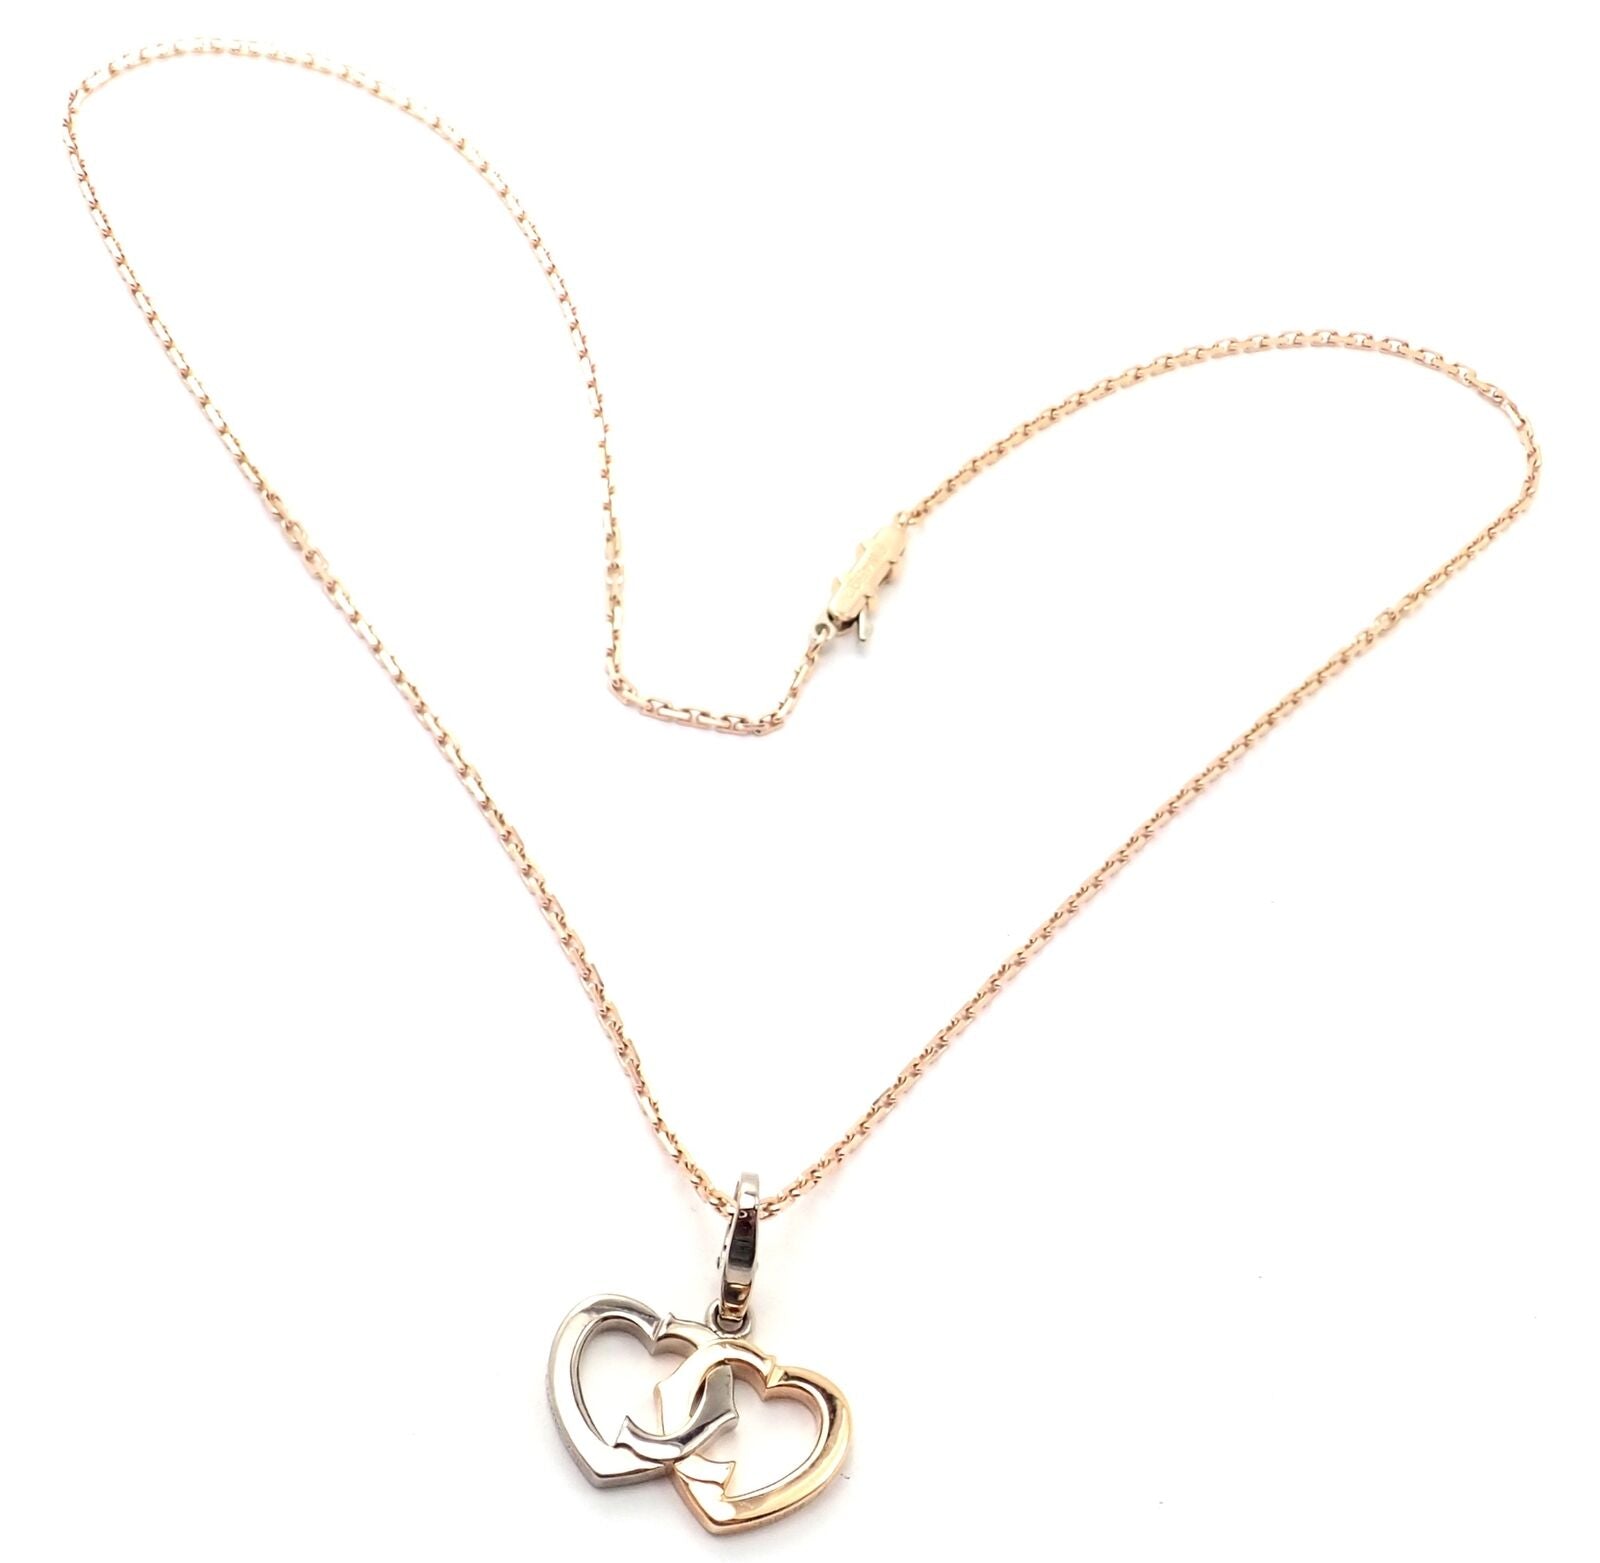 Cartier Jewelry & Watches:Fine Jewelry:Necklaces & Pendants Authentic! Cartier 18K Rose & White Gold Double C Heart Pendant Chain Necklace